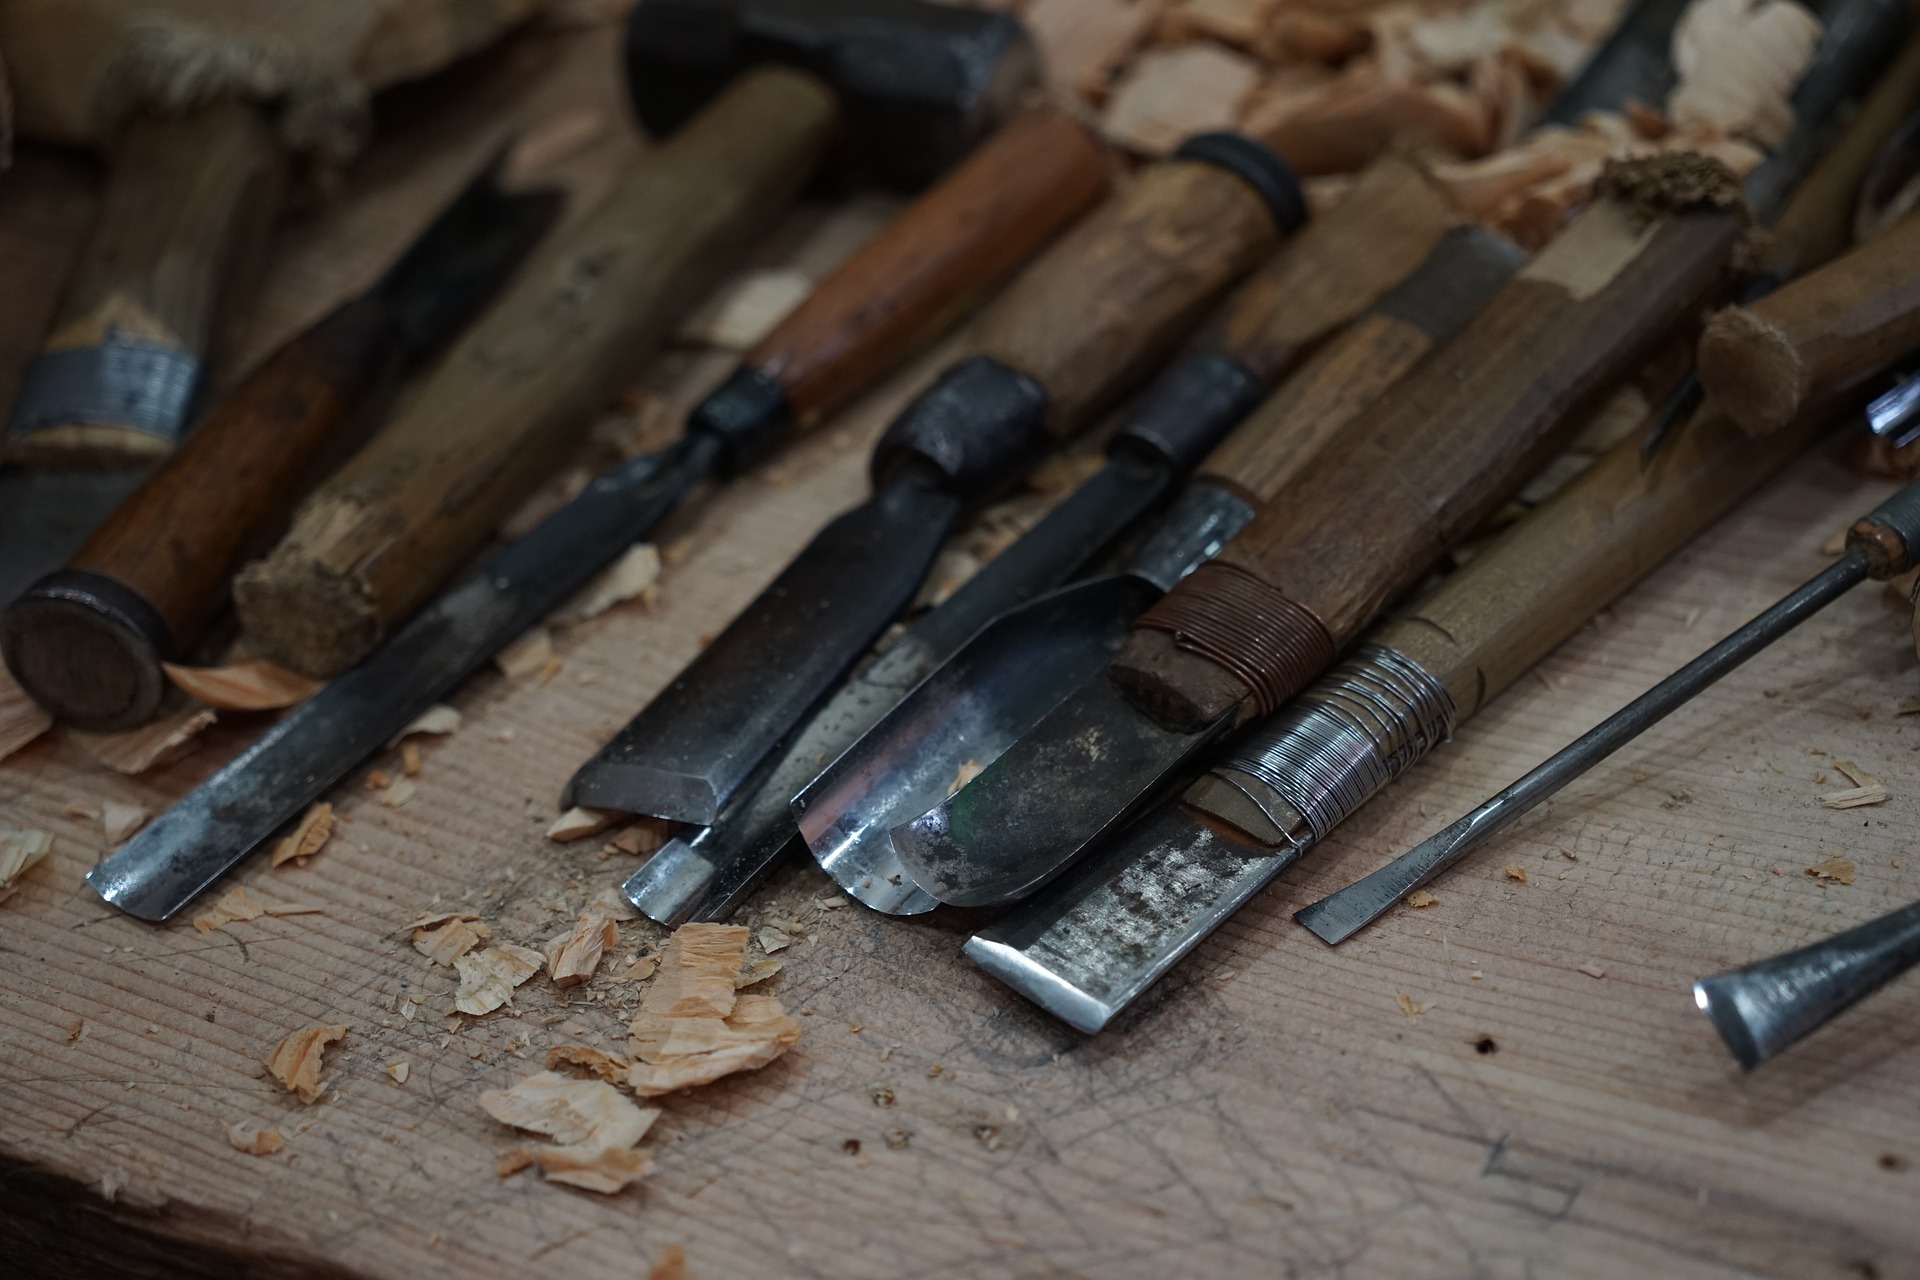 Japanese Woodworking Tools  Discovering the Merits of Carver's